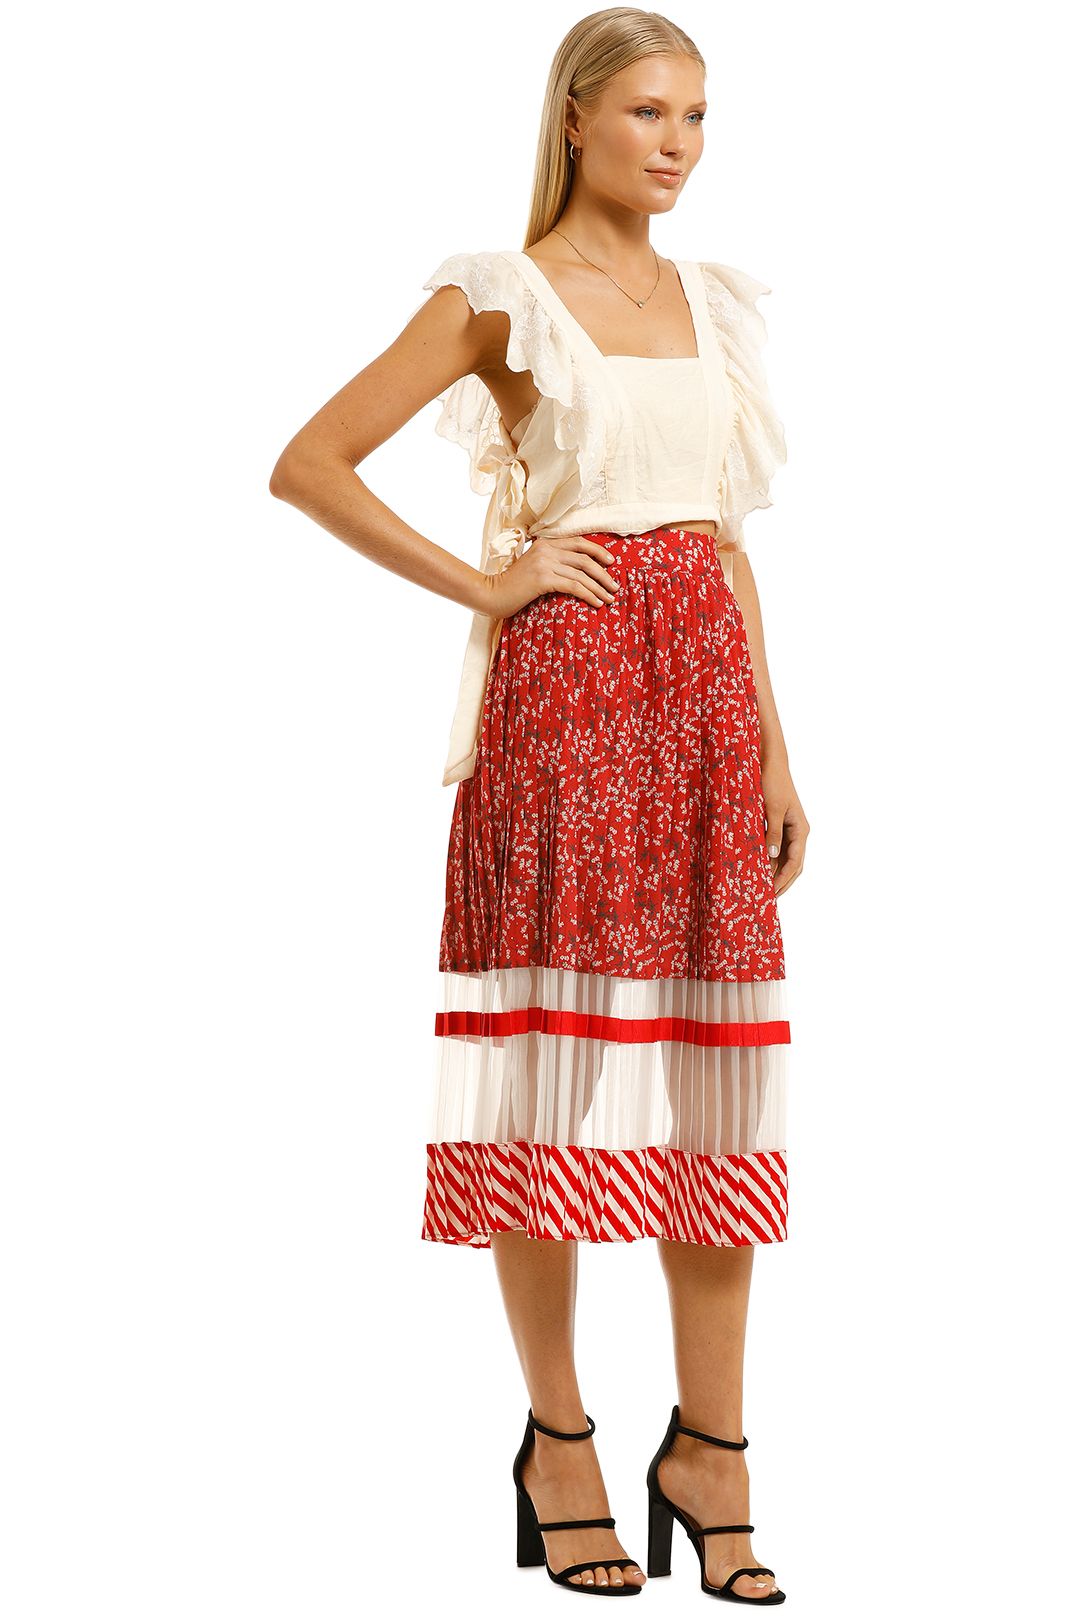 Curate-by-Trelise-Cooper-Hot Pleat-Skirt-Red-Side